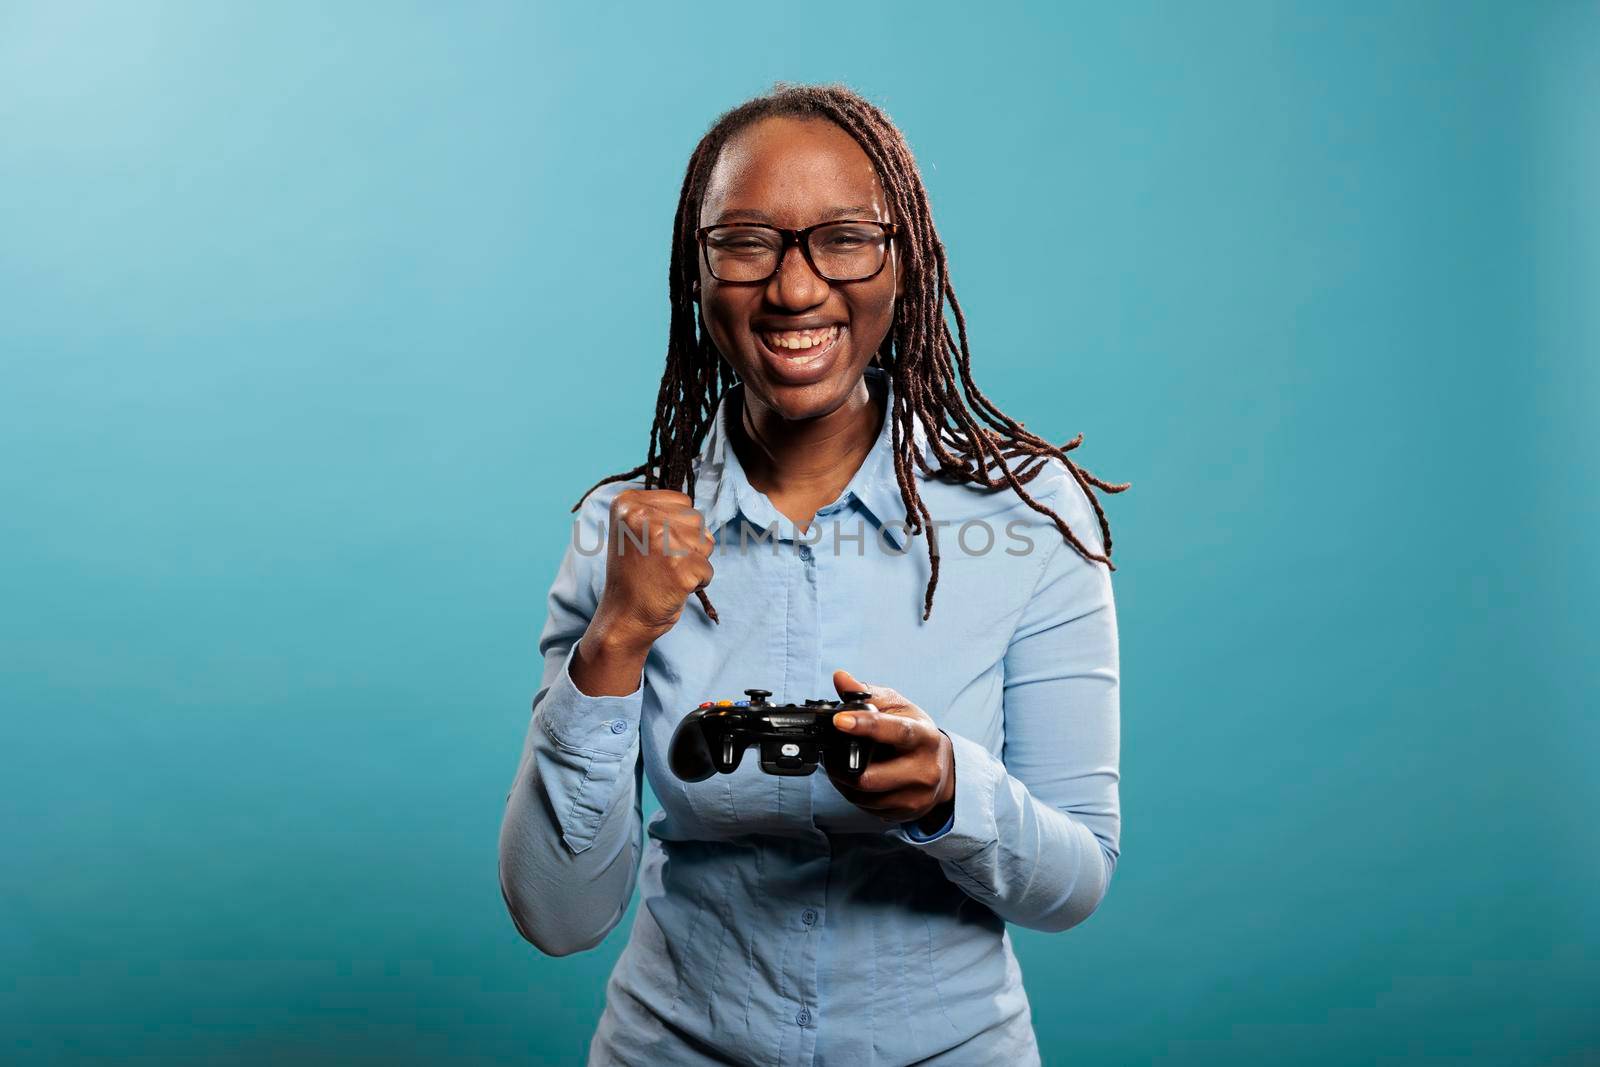 Excited happy woman playing videogames on console while celebrating match victory. Happy joyful young adult person enjoying competitive game win while standing on blue background.